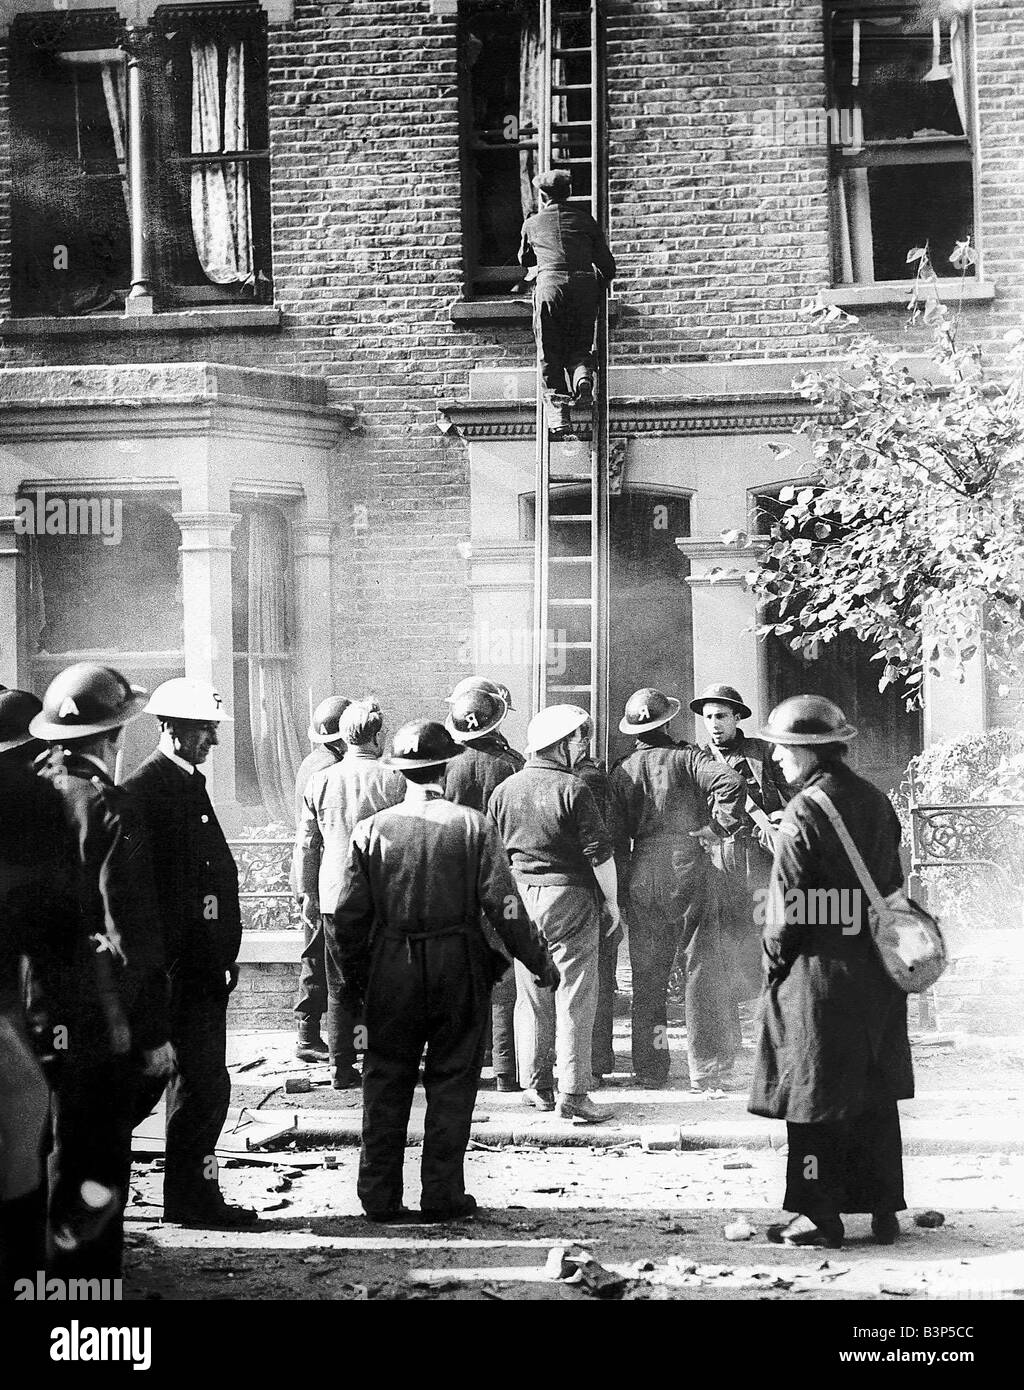 Rescue workers at scene of bomb damaged house during WW2 A man going up a ladder in search of casualties Stock Photo